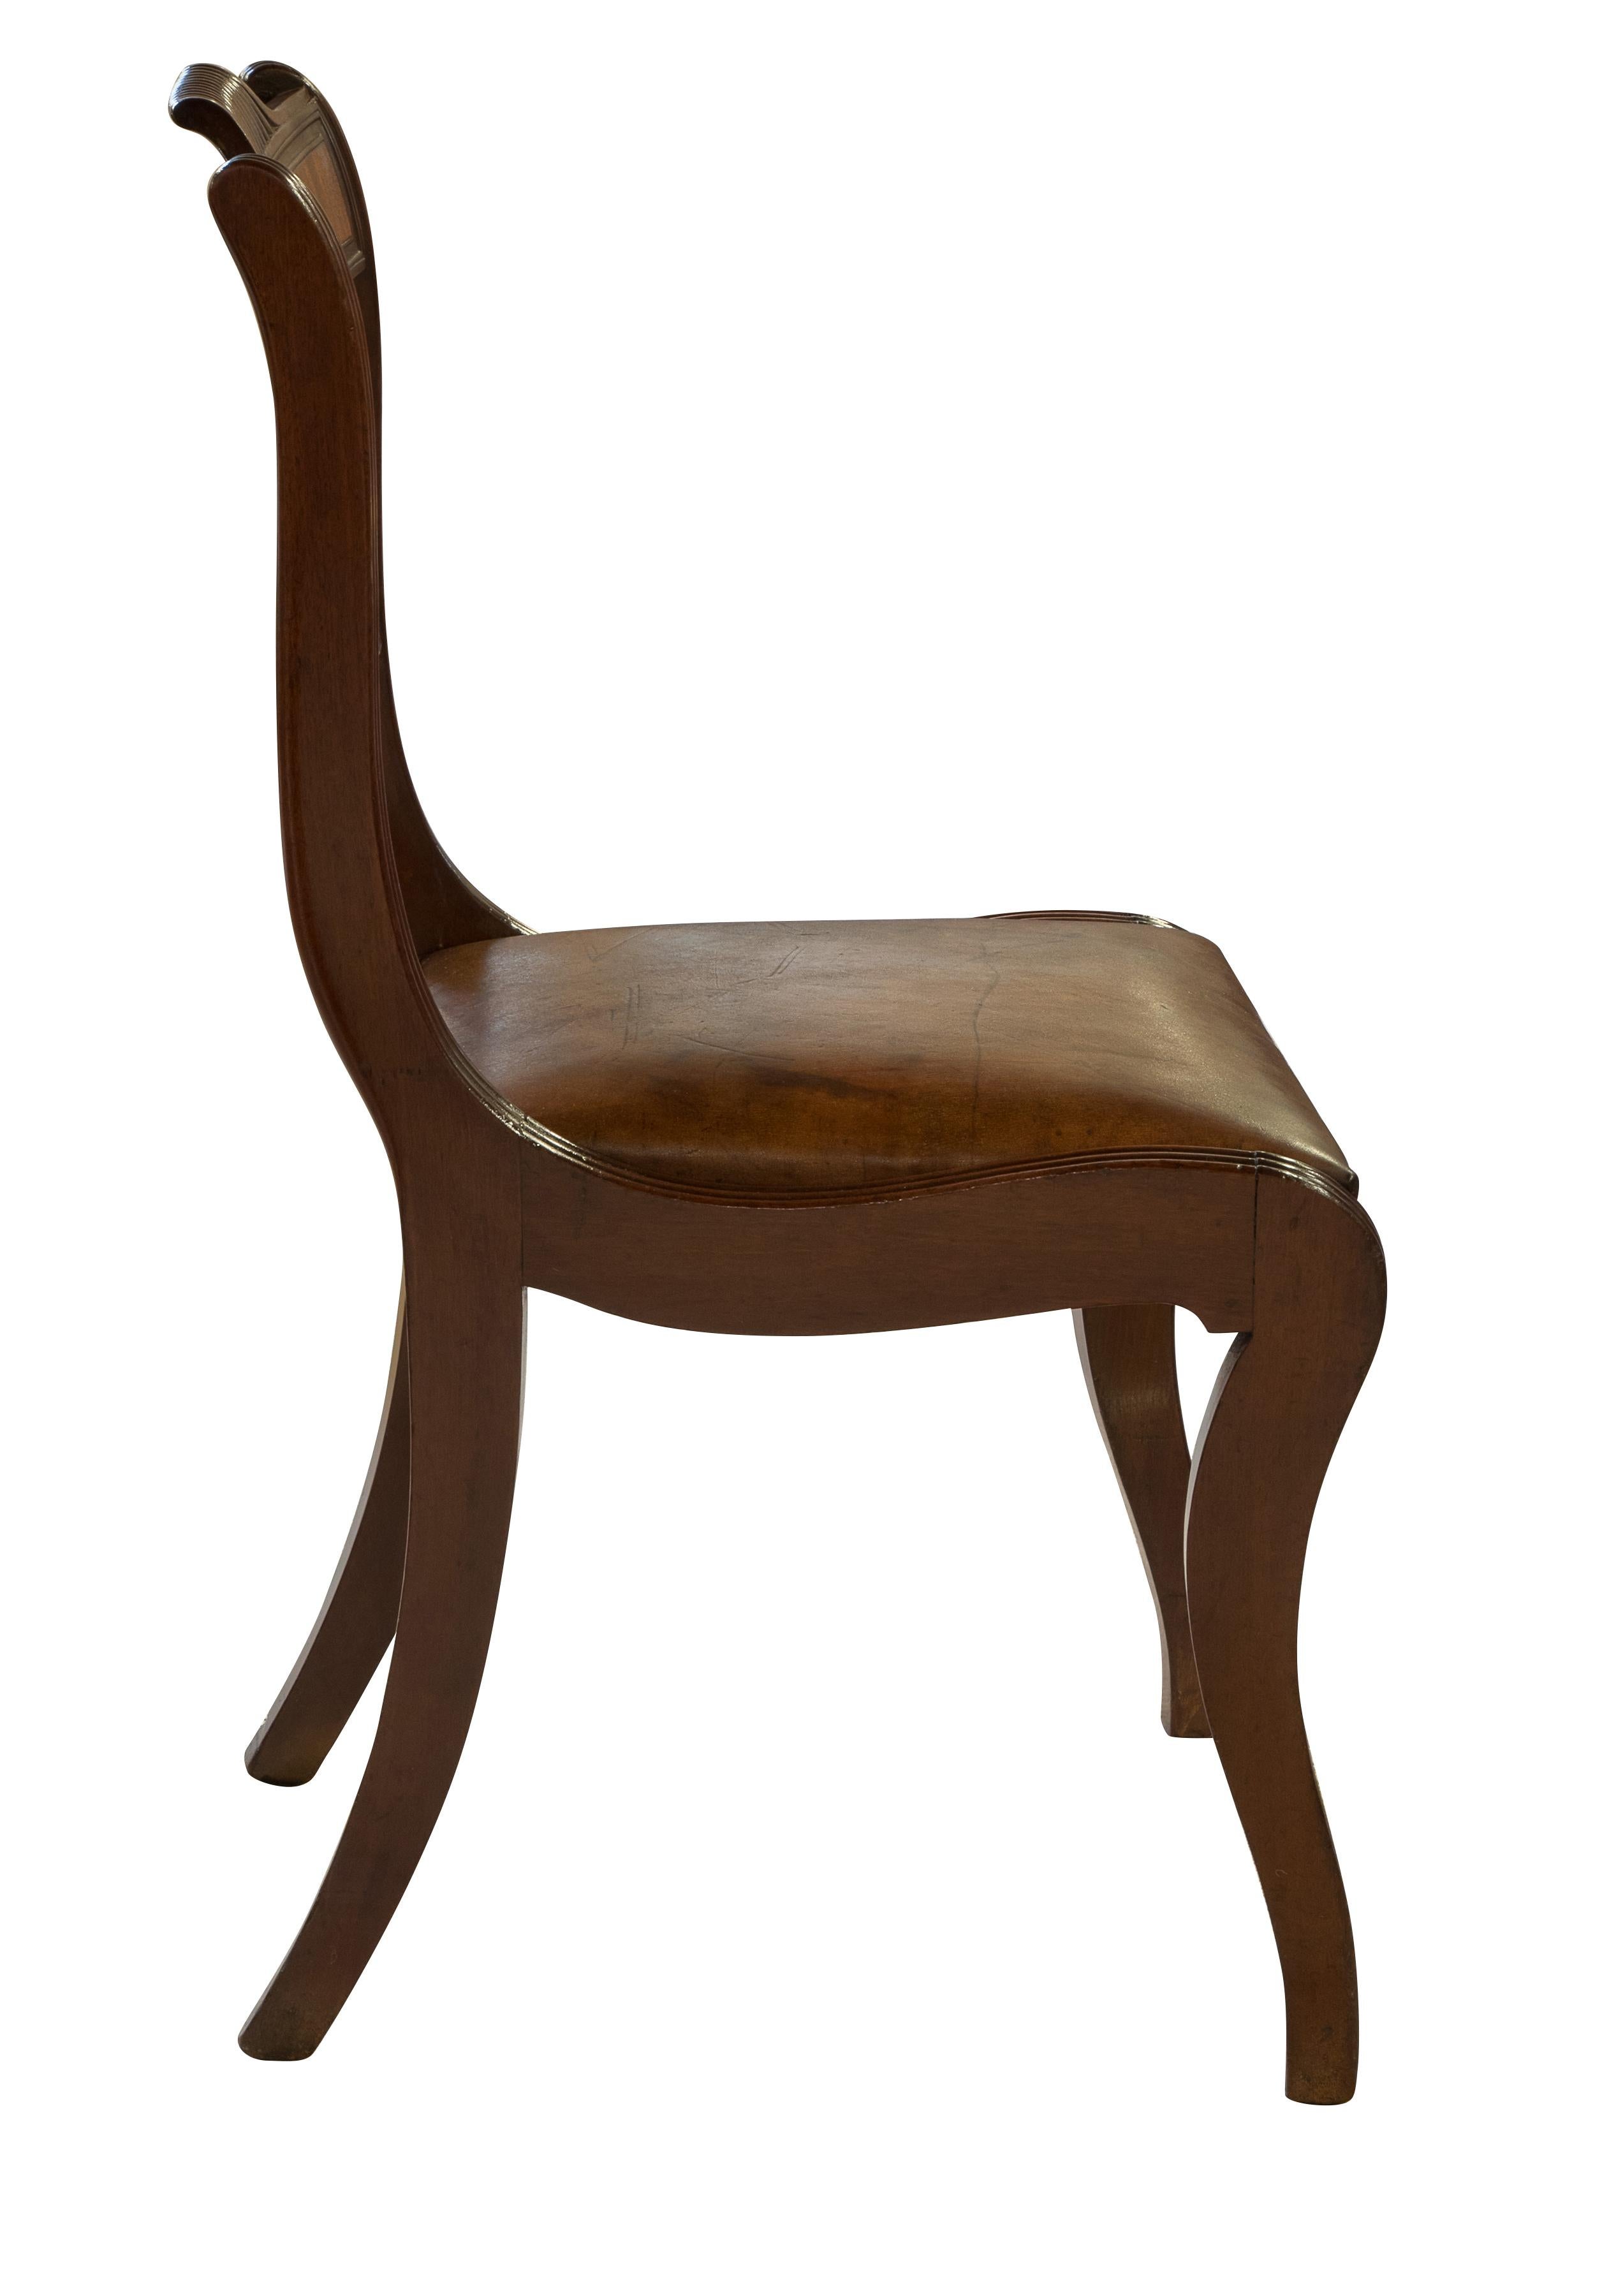 Regency Mahogany Chair with Leather Upholstered Seat, circa 1830 In Good Condition For Sale In Salisbury, GB